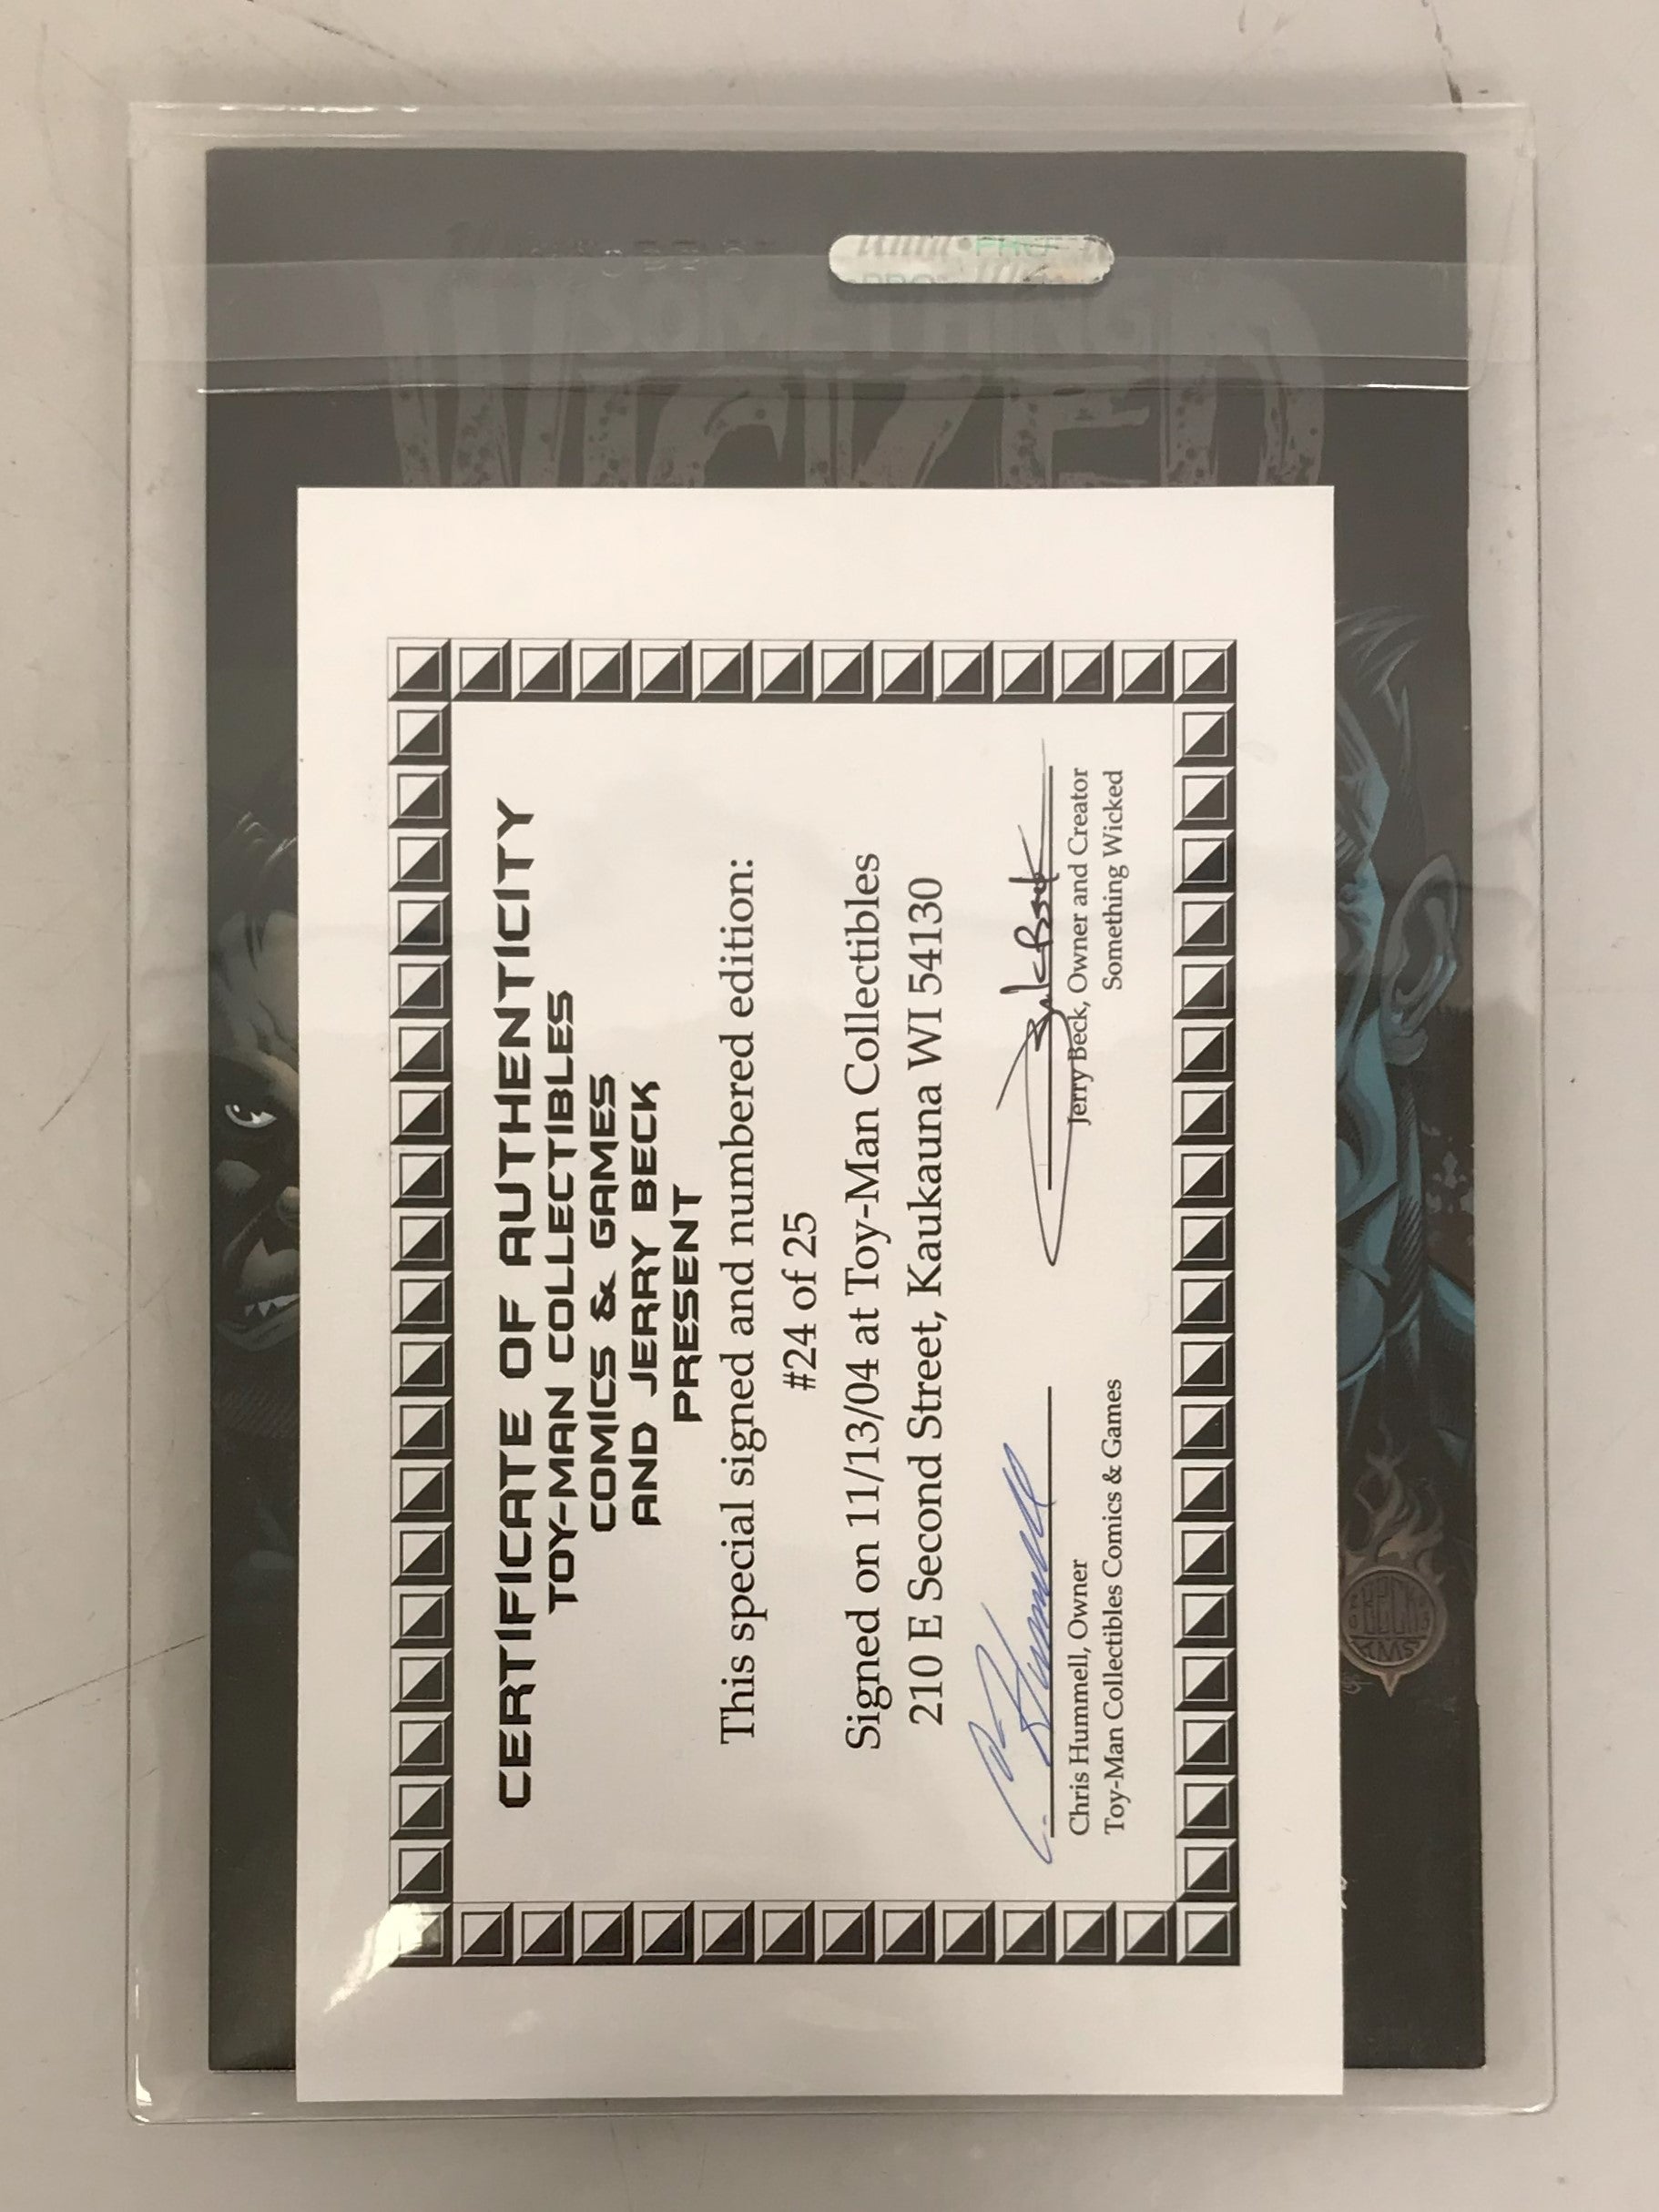 Something Wicked 1 2003 In Original Sleeve with Signature and Certificate of Authenticity